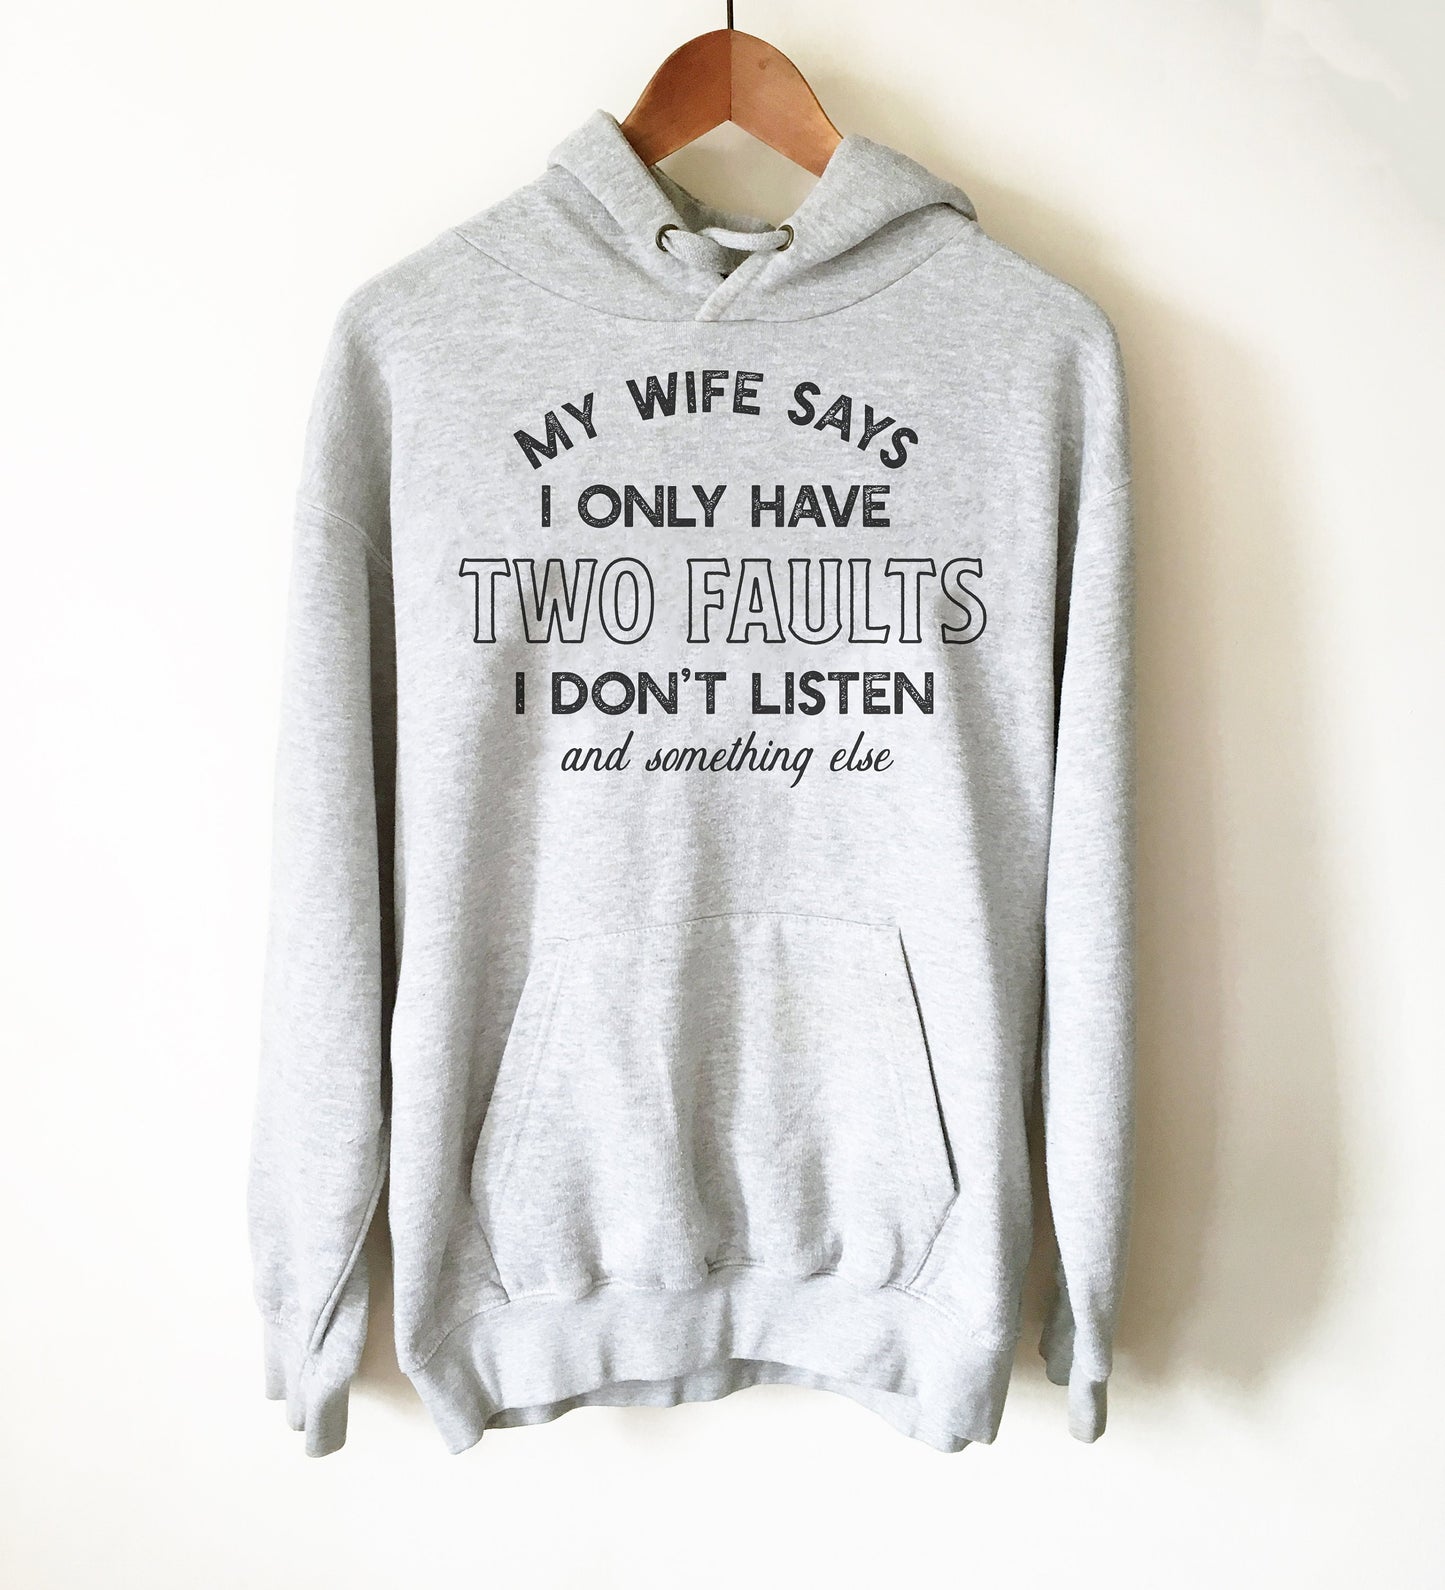 My Wife Says I Only Have Two Faults Hoodie - Husband Shirt, Husband Gift, Fathers Day Shirt, Wife Shirt, Anniversary Shirt